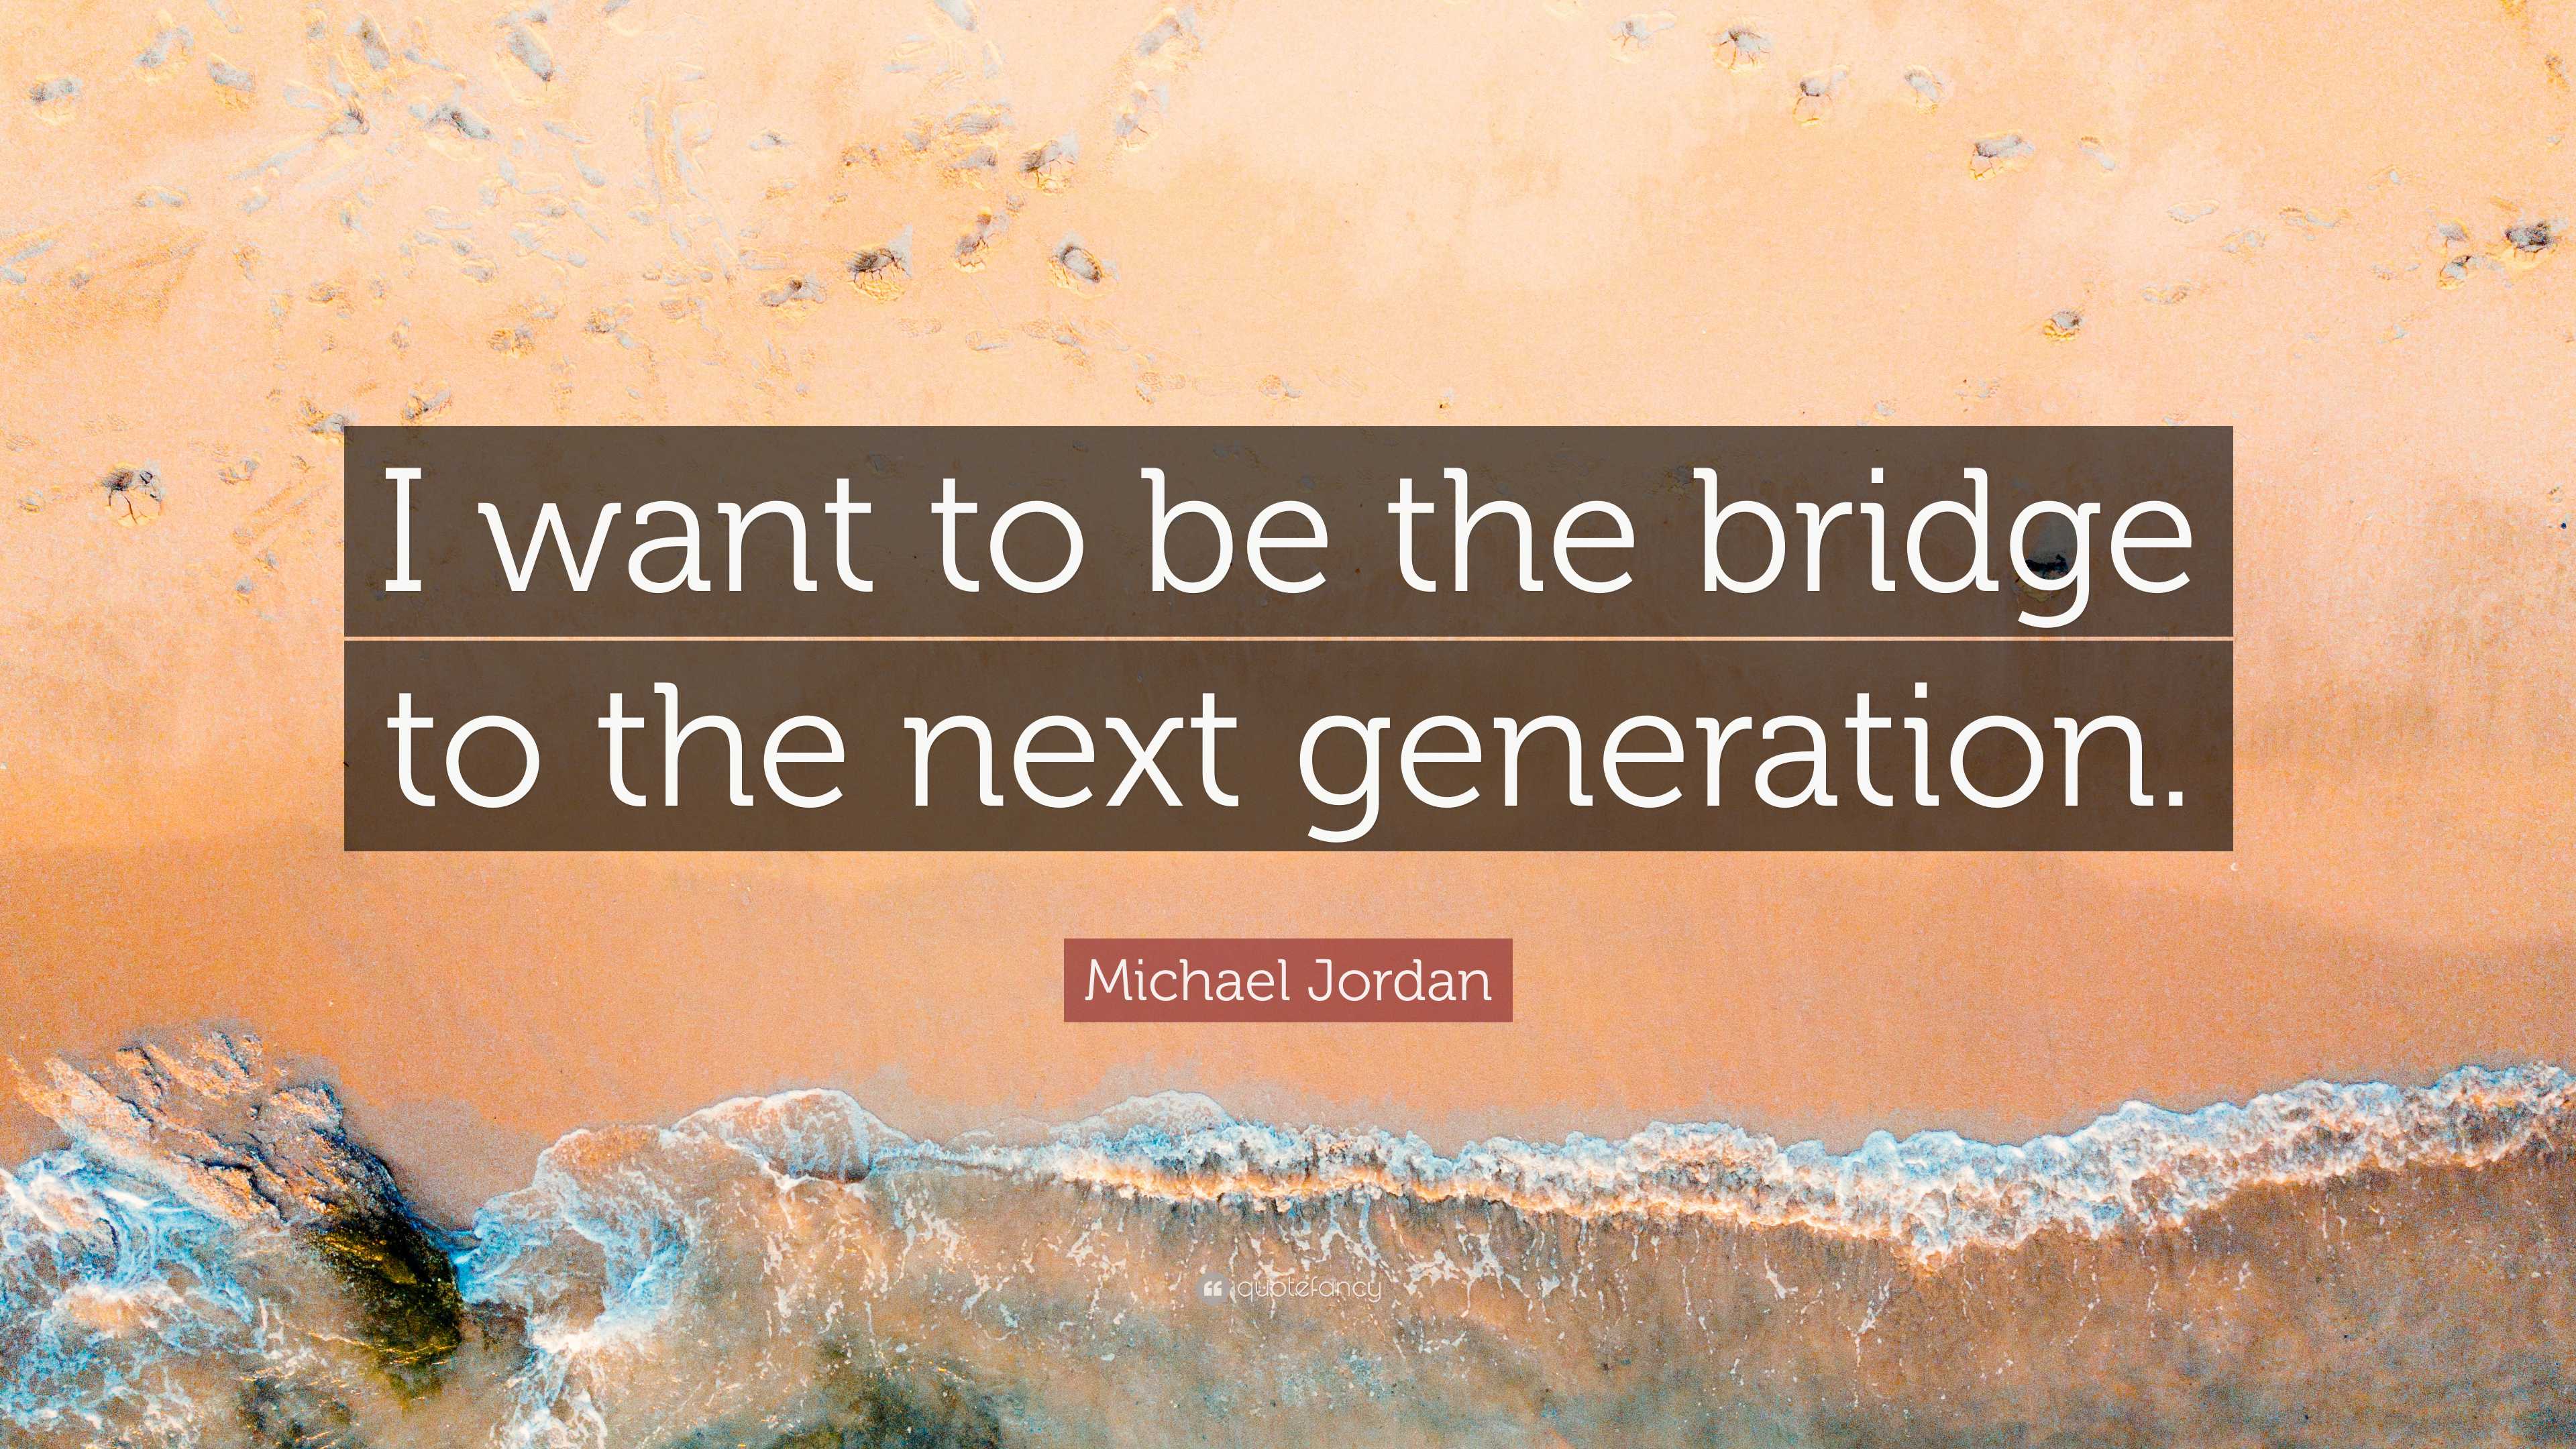 Michael Jordan Quote: “I want to be the bridge to the next ...